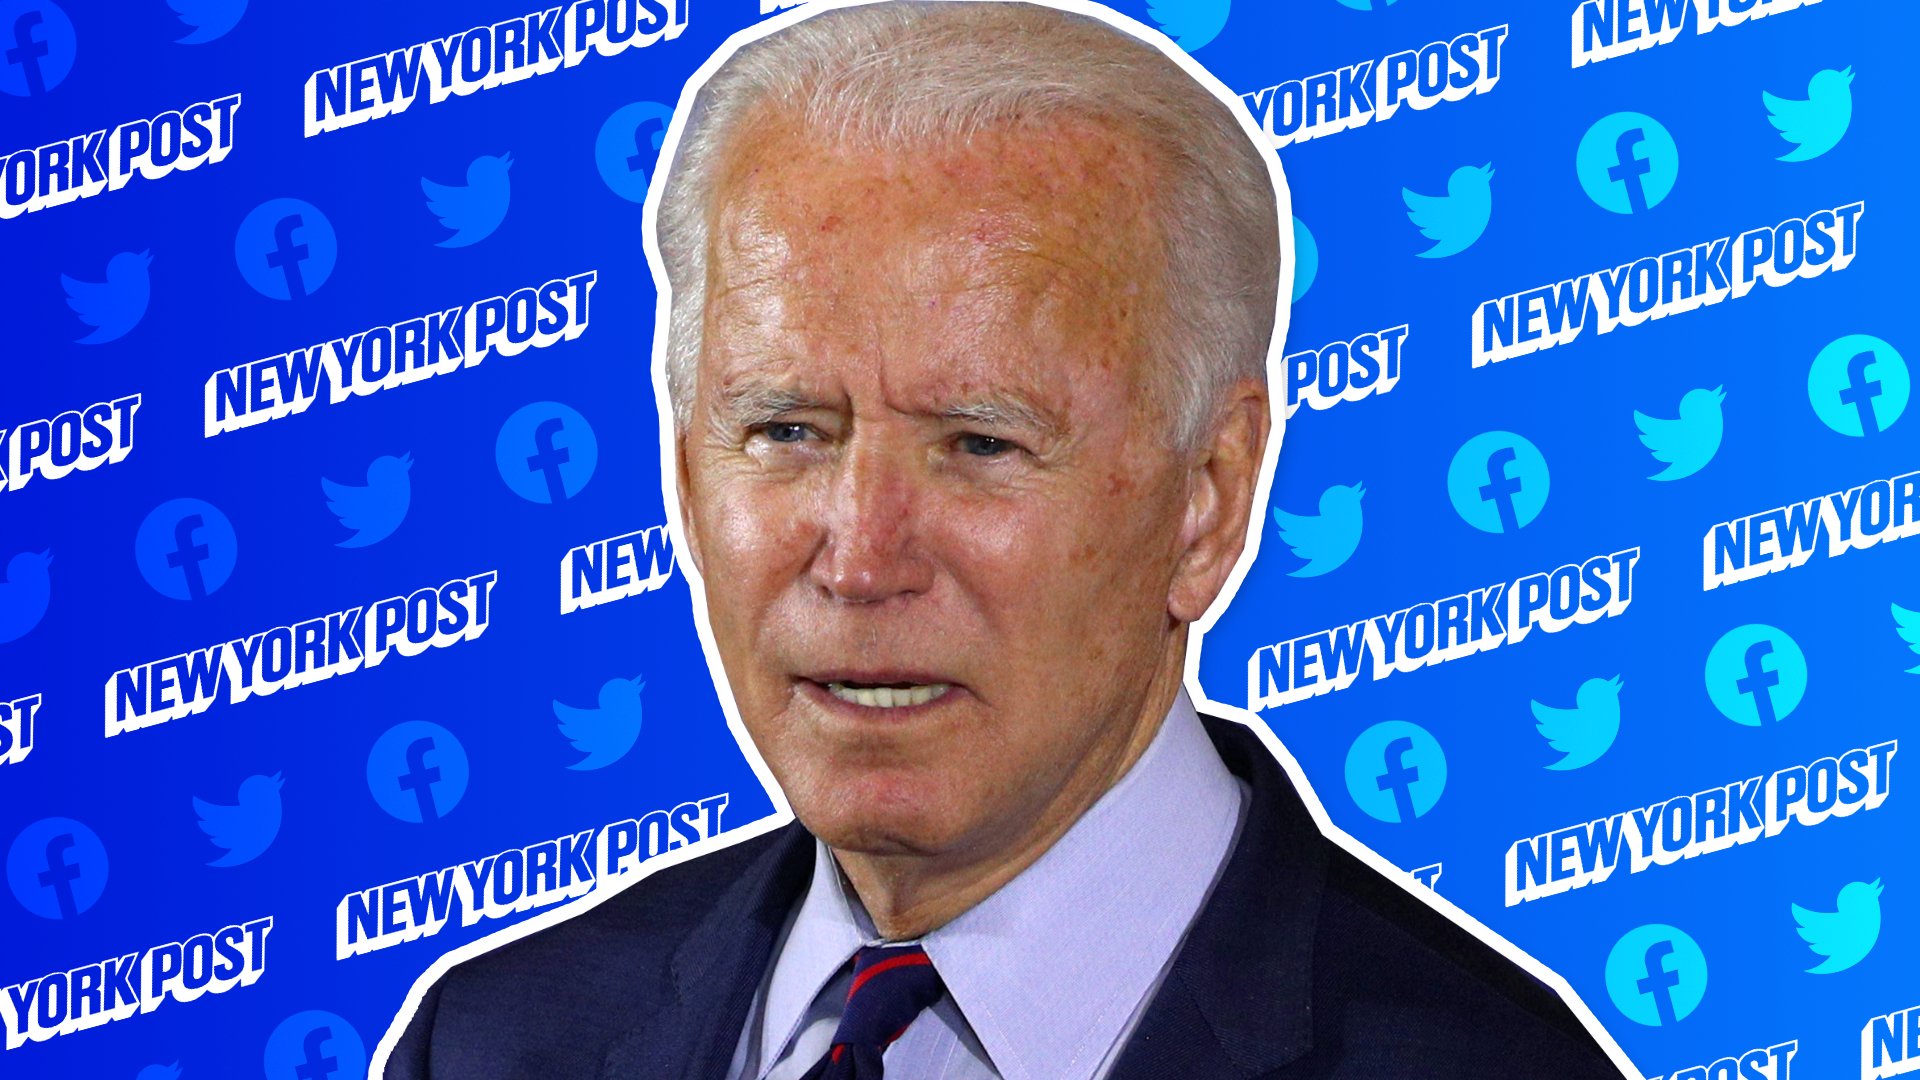 Twitter And Facebooks Action Over Joe Biden Article Reignites Bias Claims Bbc News 5918